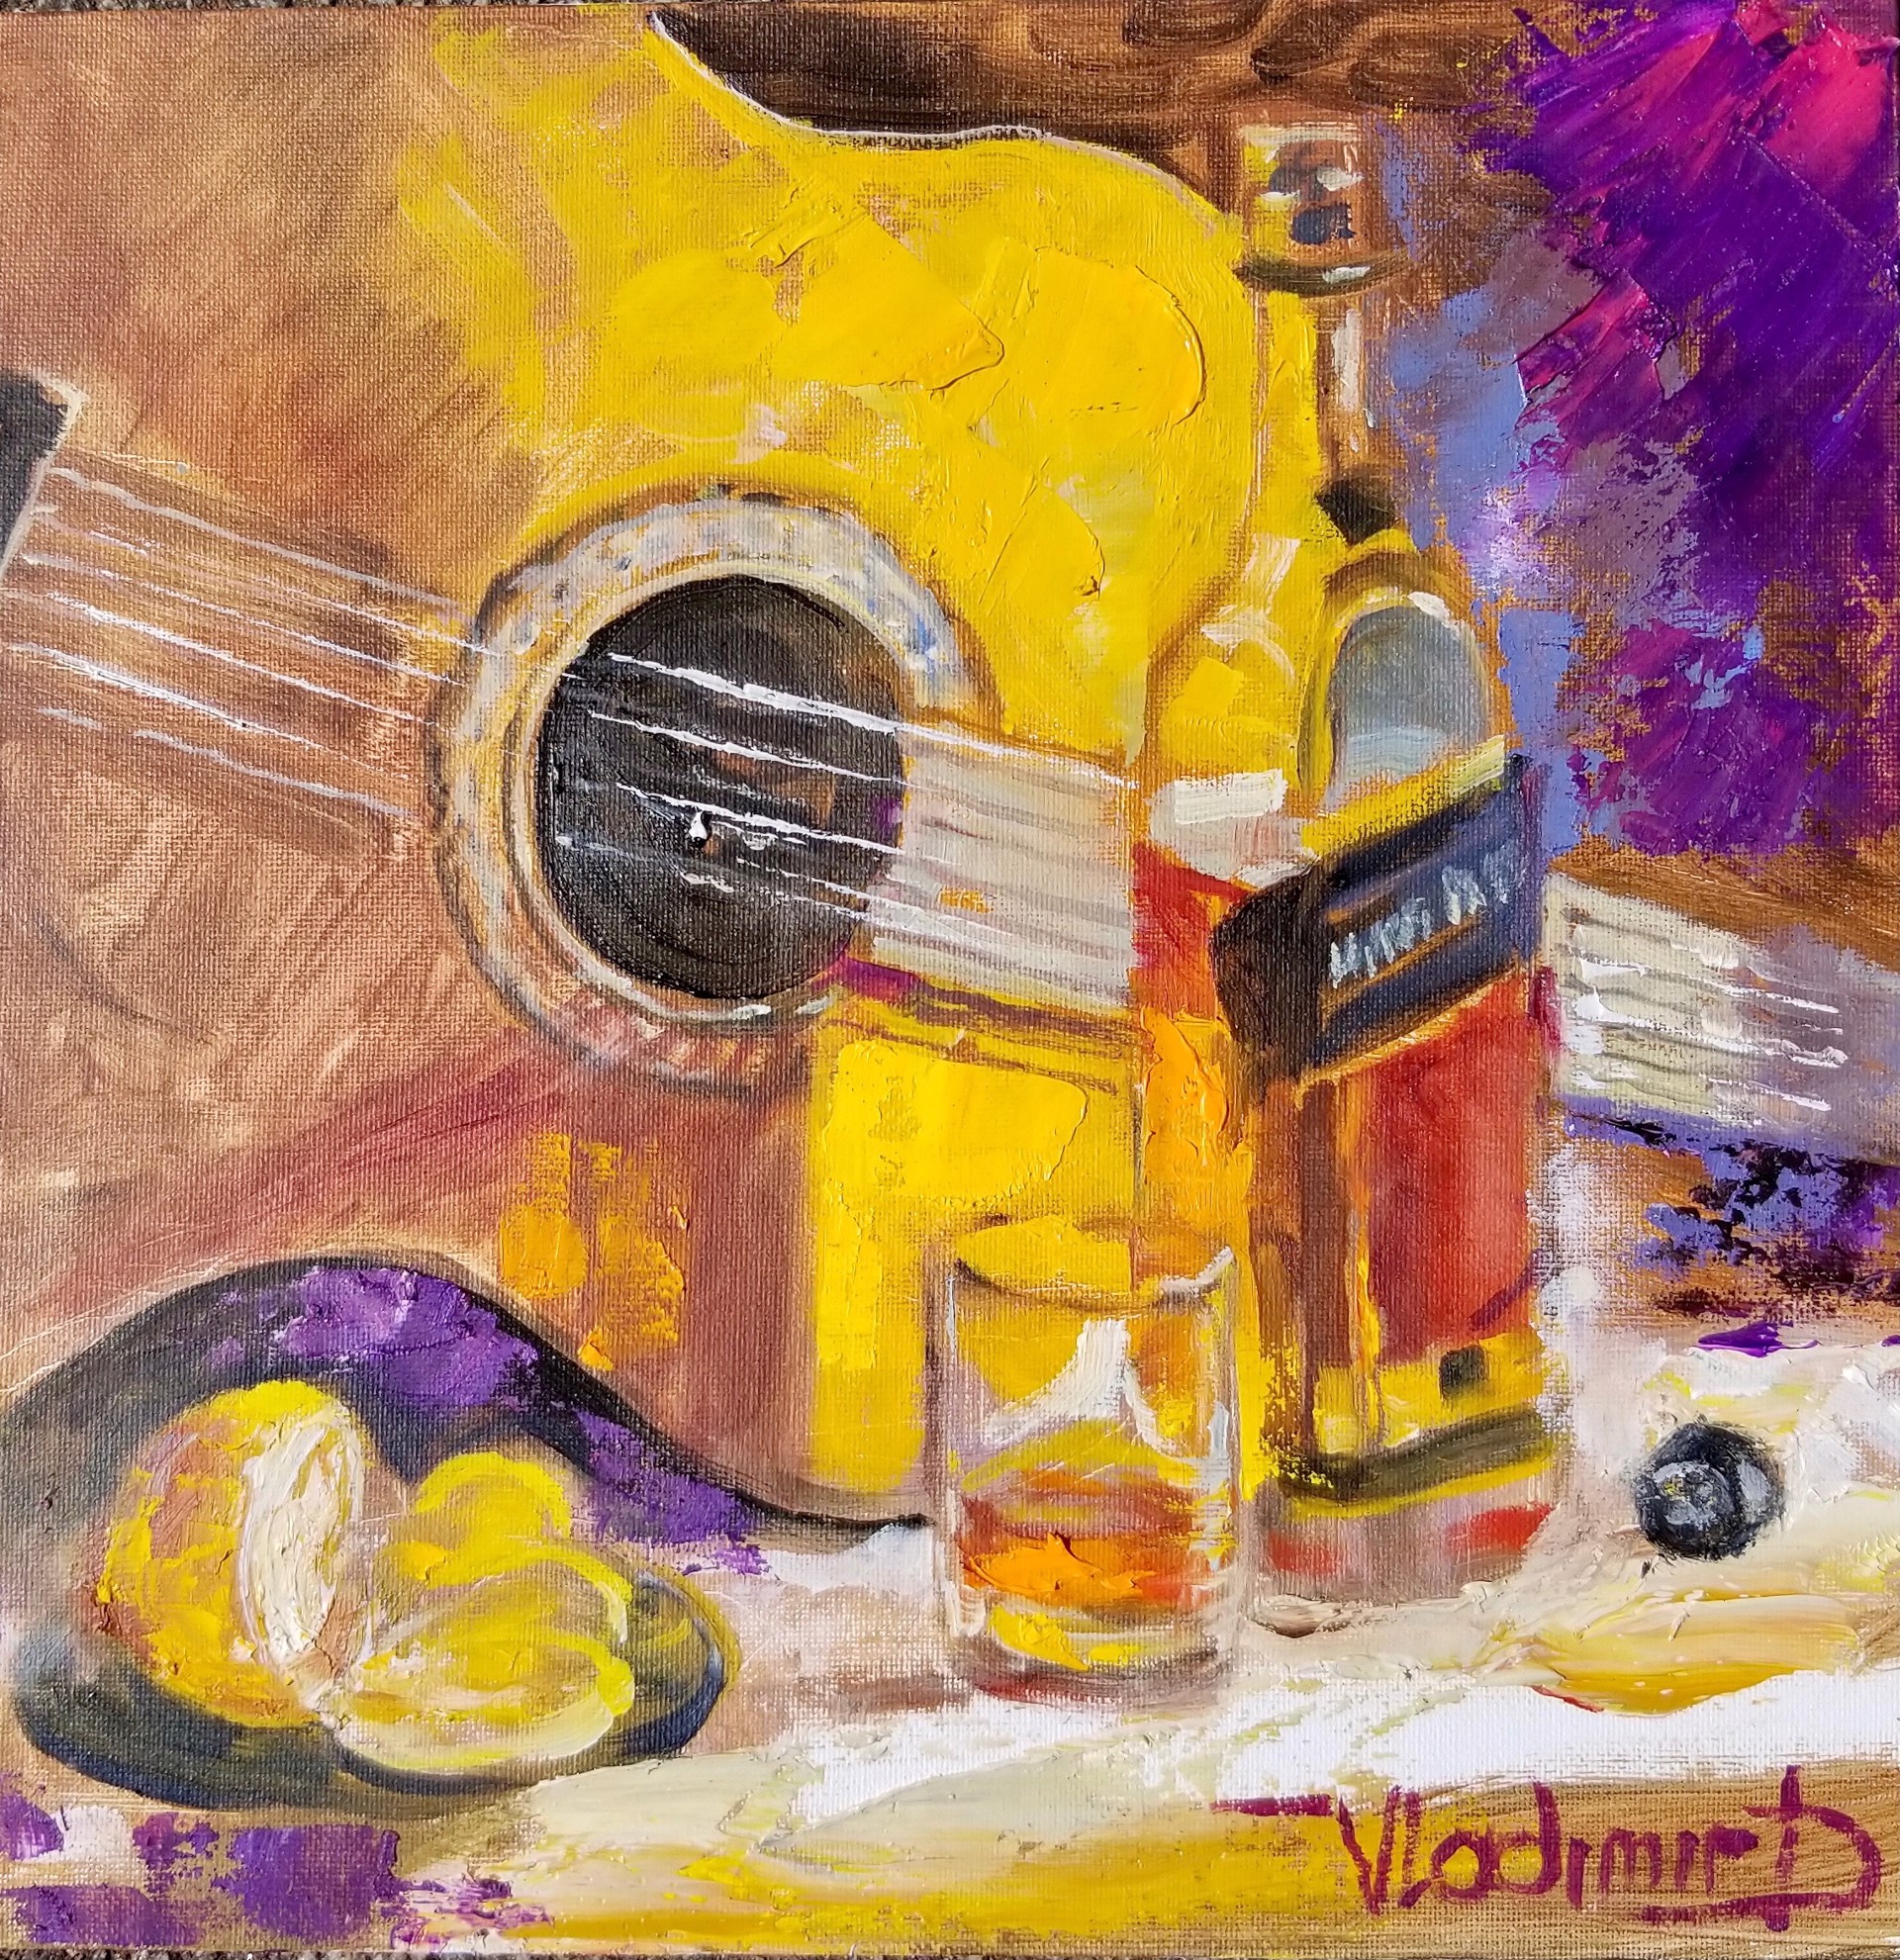 Guitar and Whiskey by Vladimir Demidovich